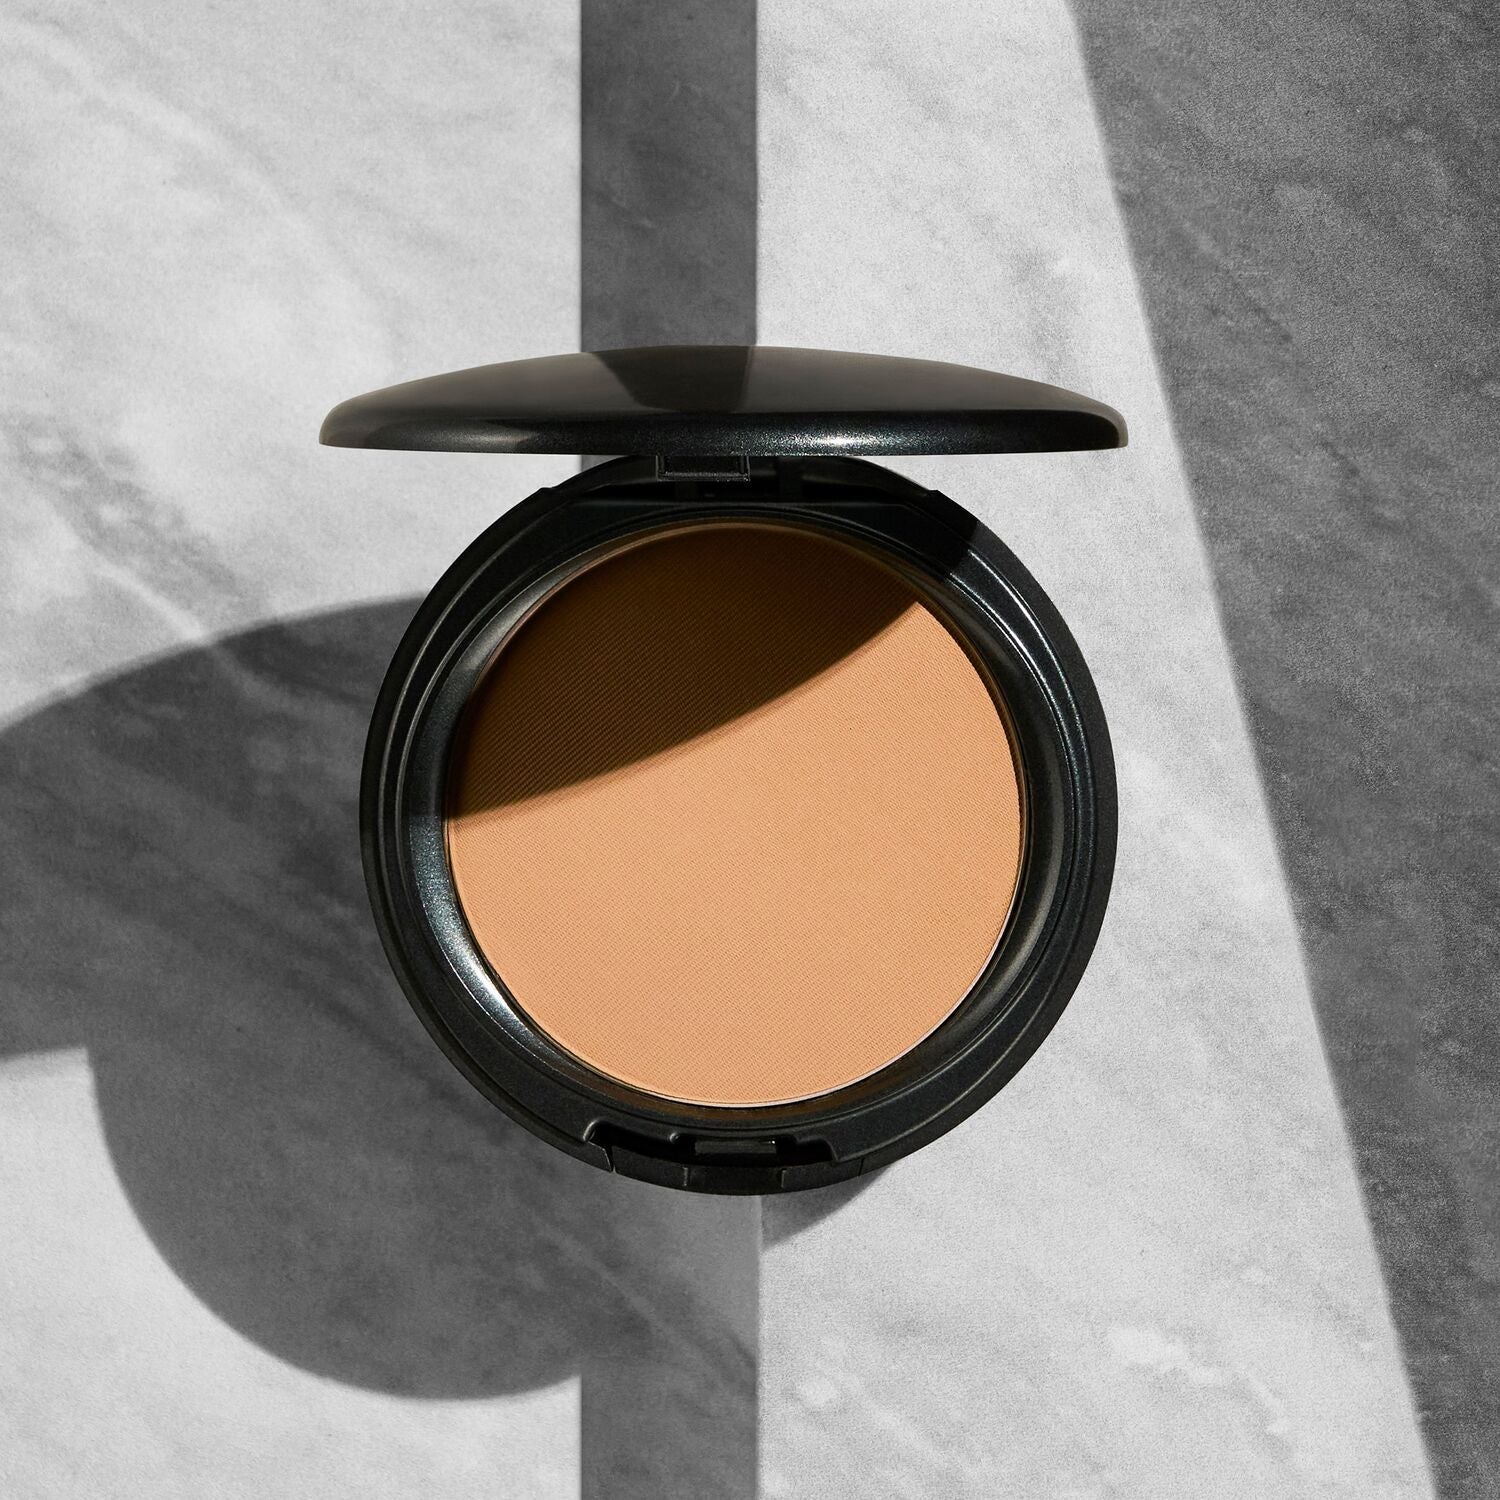 Coverfx Pressed Mineral Foundation in shade M2